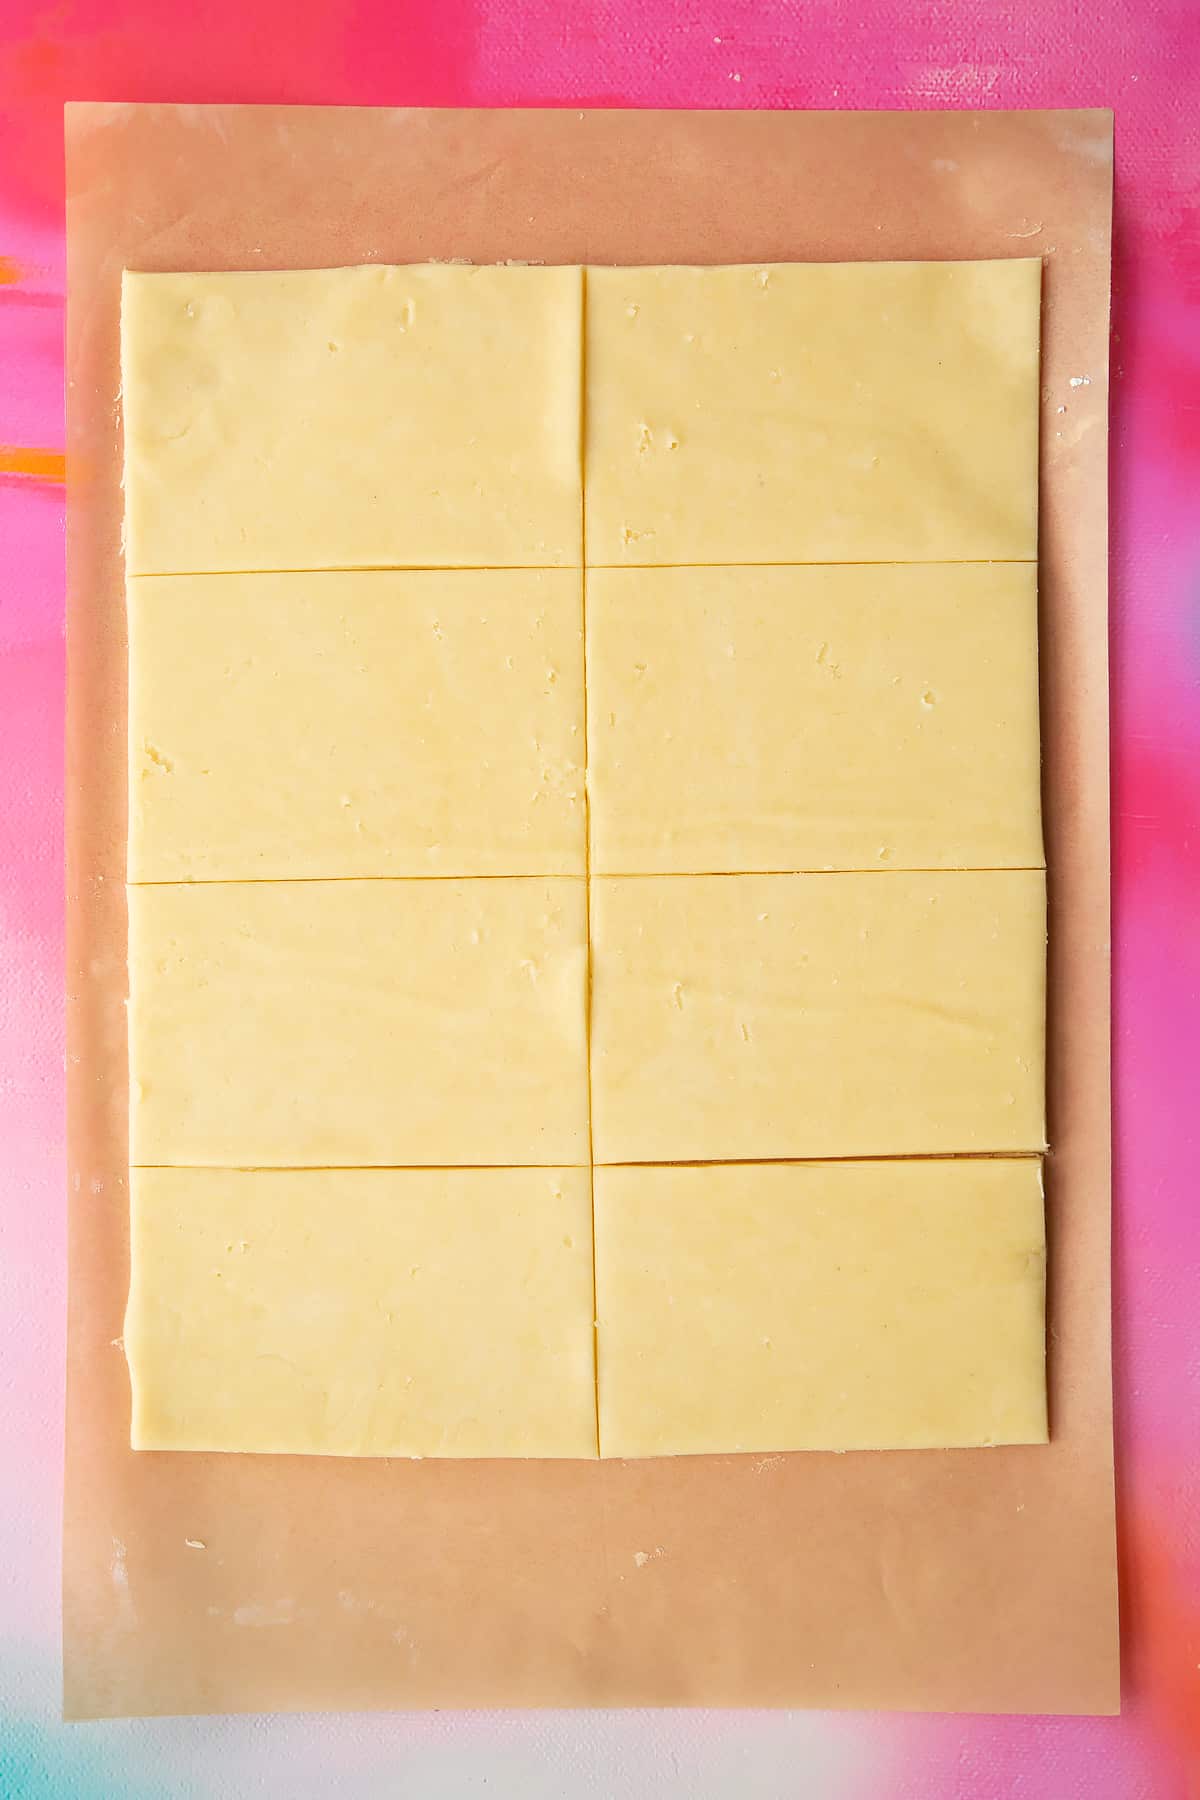 A neat rectangle of gluten free pasty rolled out on a sheet of baking paper and cut into eight pieces.